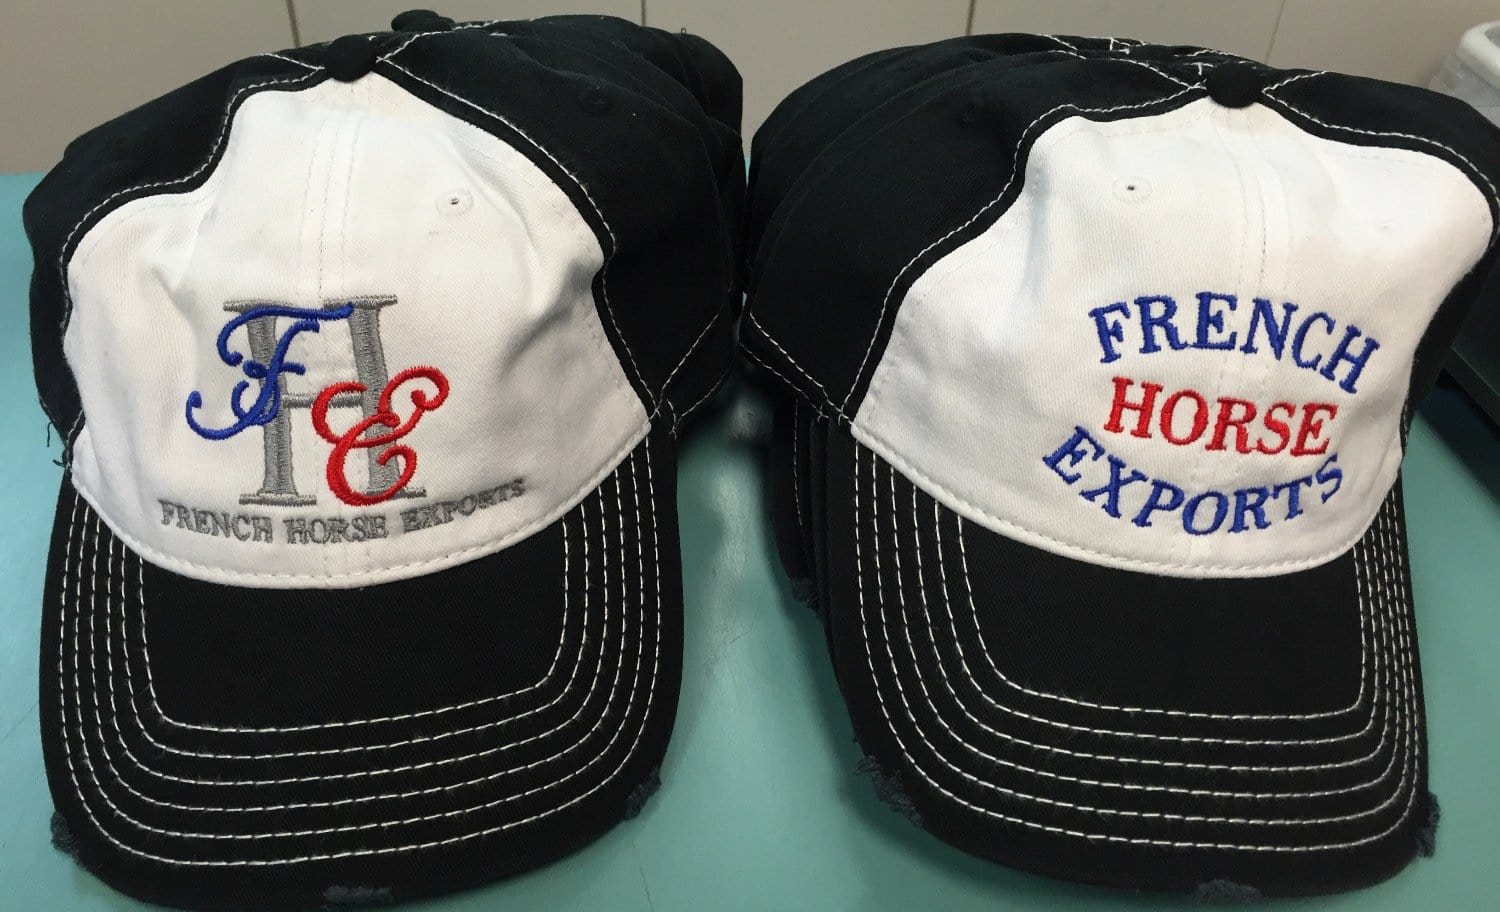 Equestrian Team Apparel Custom Team Hats One Size French Horse Exports baseball cap with logo equestrian team apparel online tack store mobile tack store custom farm apparel custom show stable clothing equestrian lifestyle horse show clothing riding clothes horses equestrian tack store